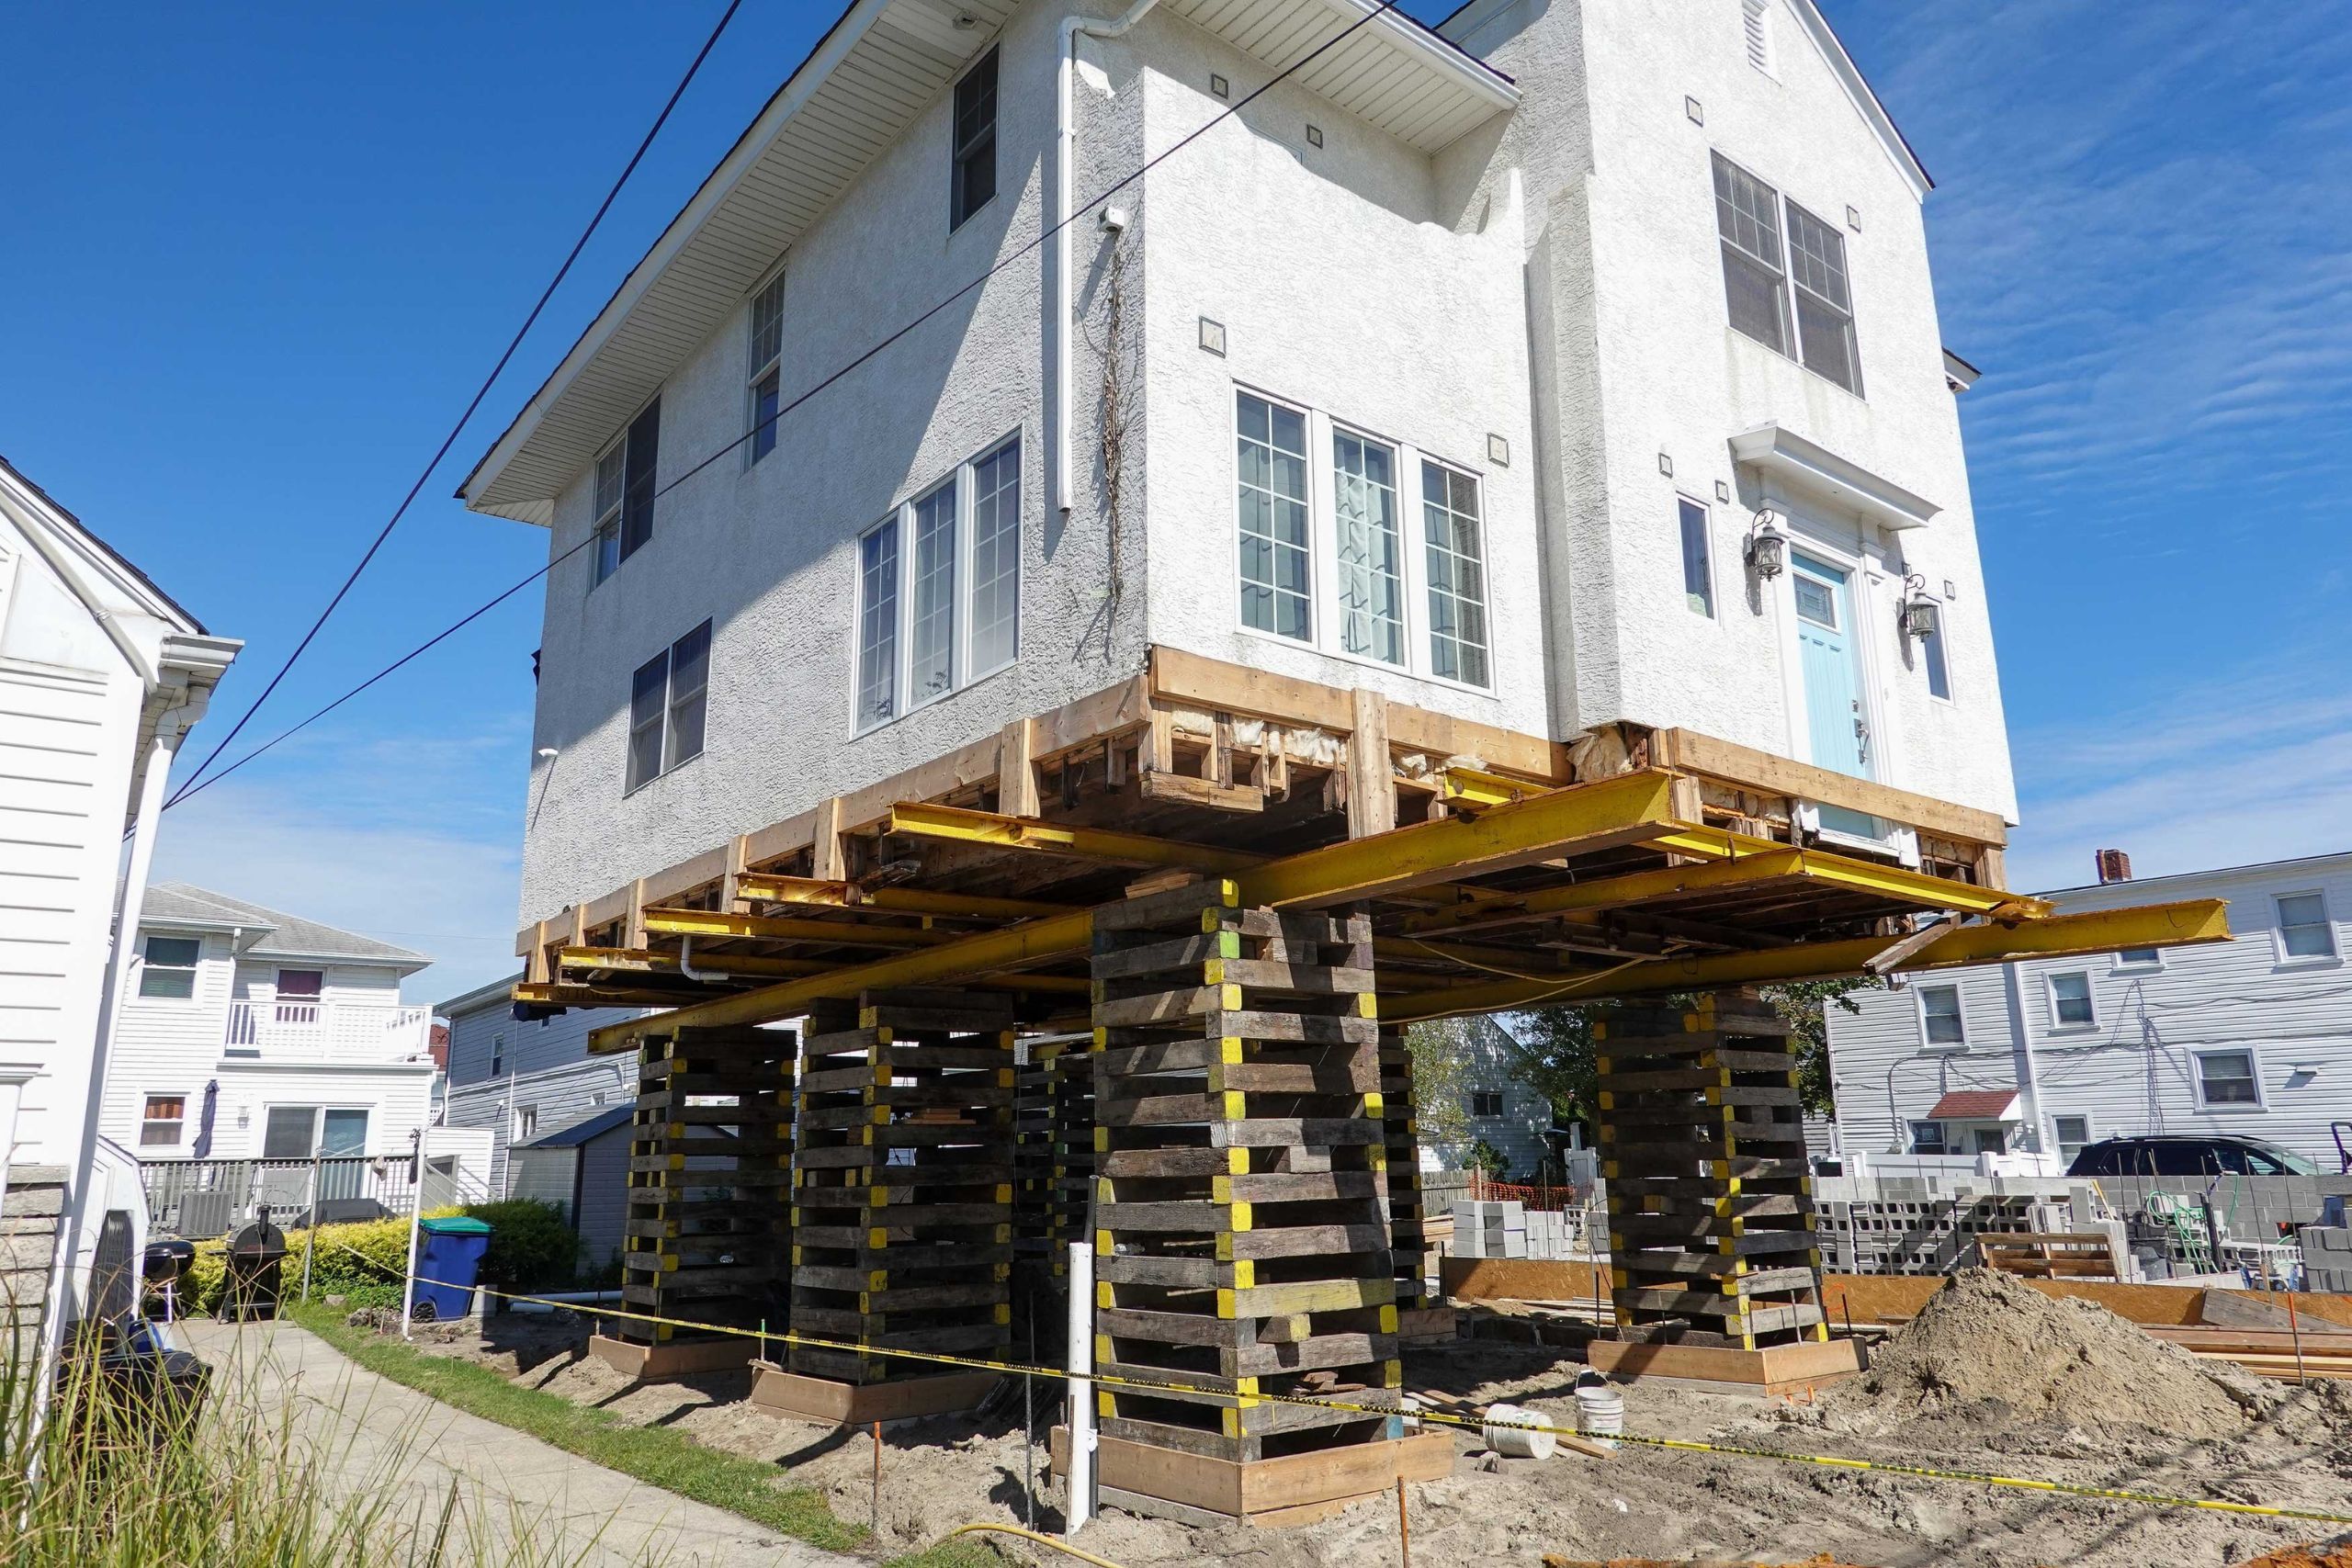 A team of professionals using specialized equipment to raise a house in Palm Beach, preparing it for elevation and renovation